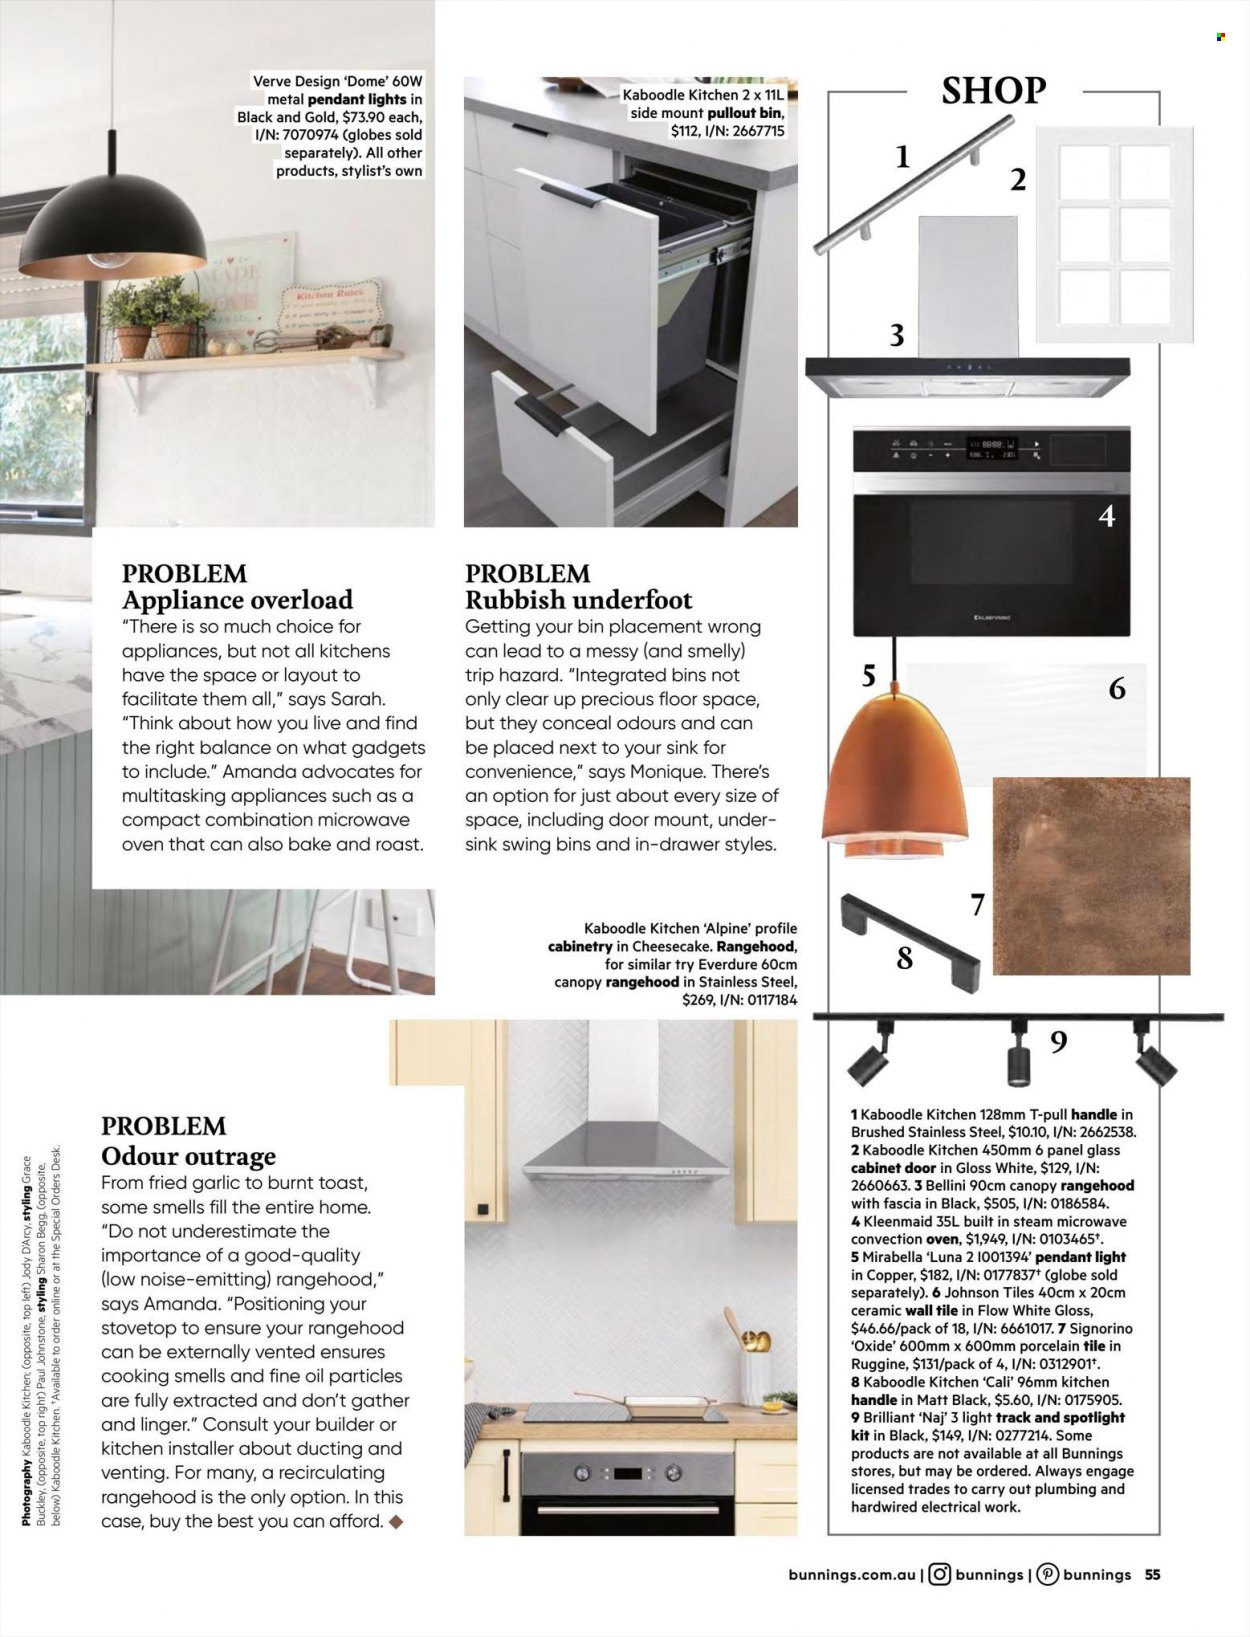 thumbnail - Bunnings Warehouse Catalogue - 1 May 2022 - 30 Jun 2022 - Sales products - cabinet, desk, sink, spotlight, oven, convection oven, microwave, metal pendant, porcelain tile. Page 55.